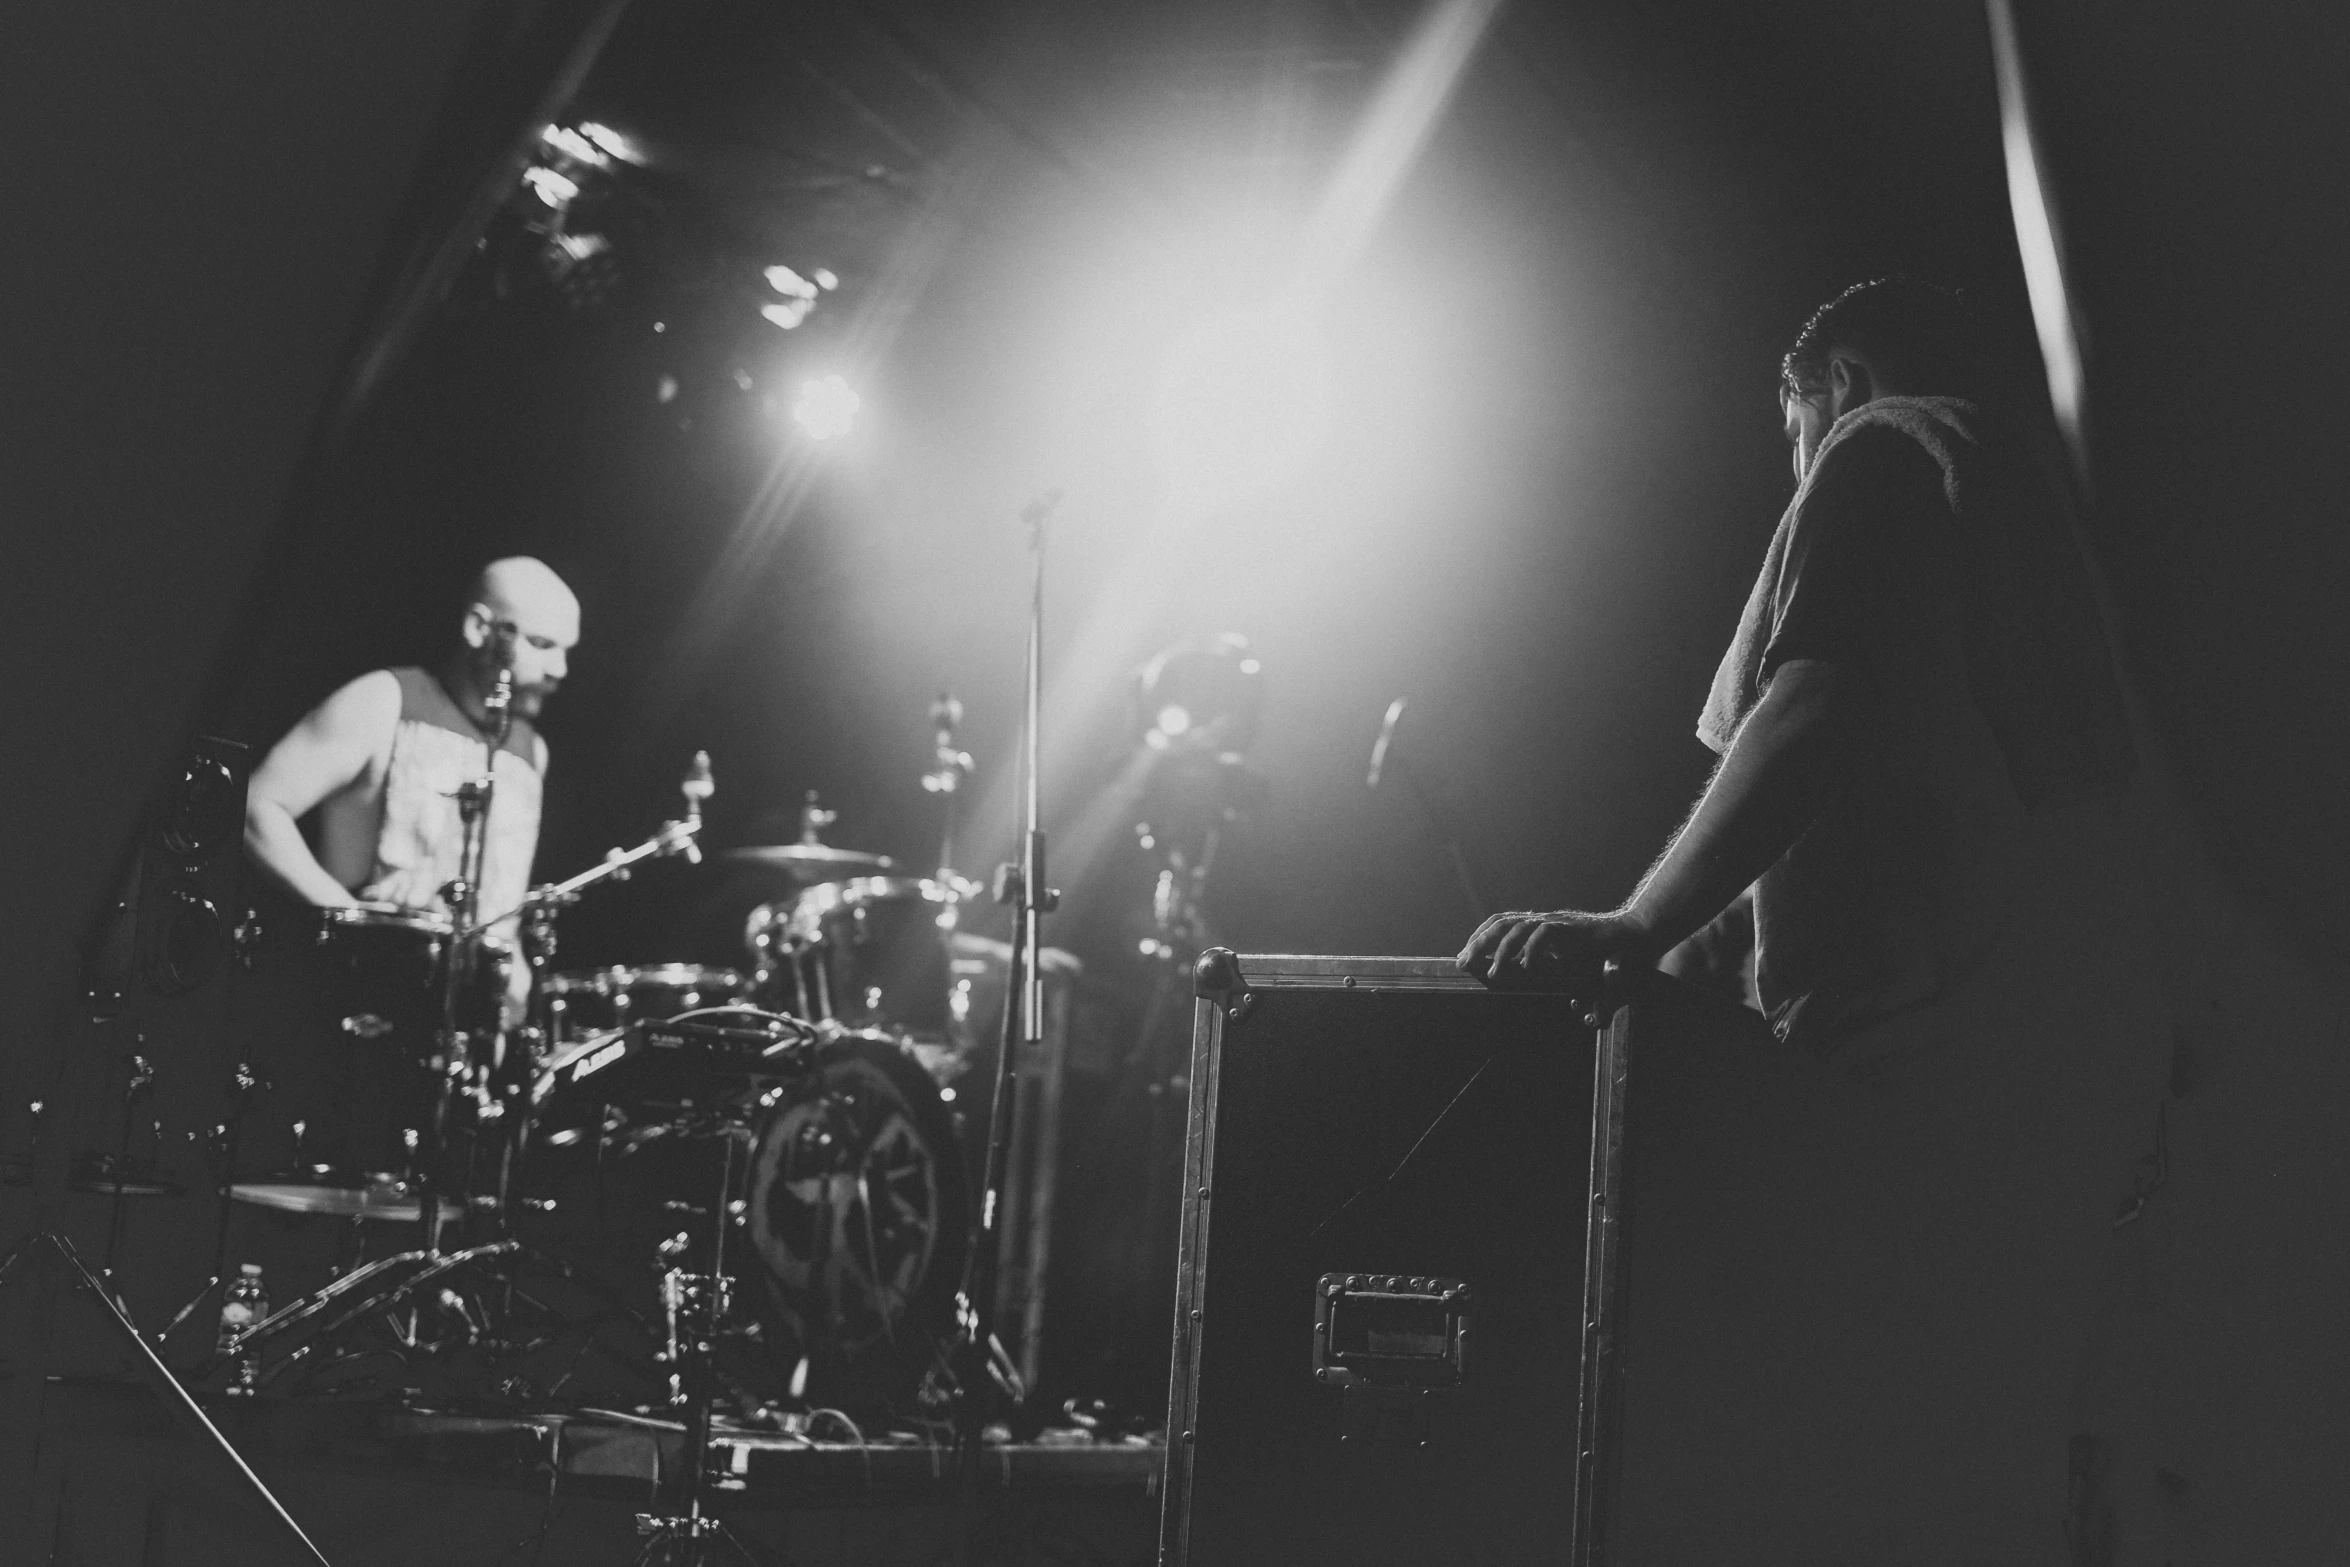 two men are playing on the drum set while another man stands behind them